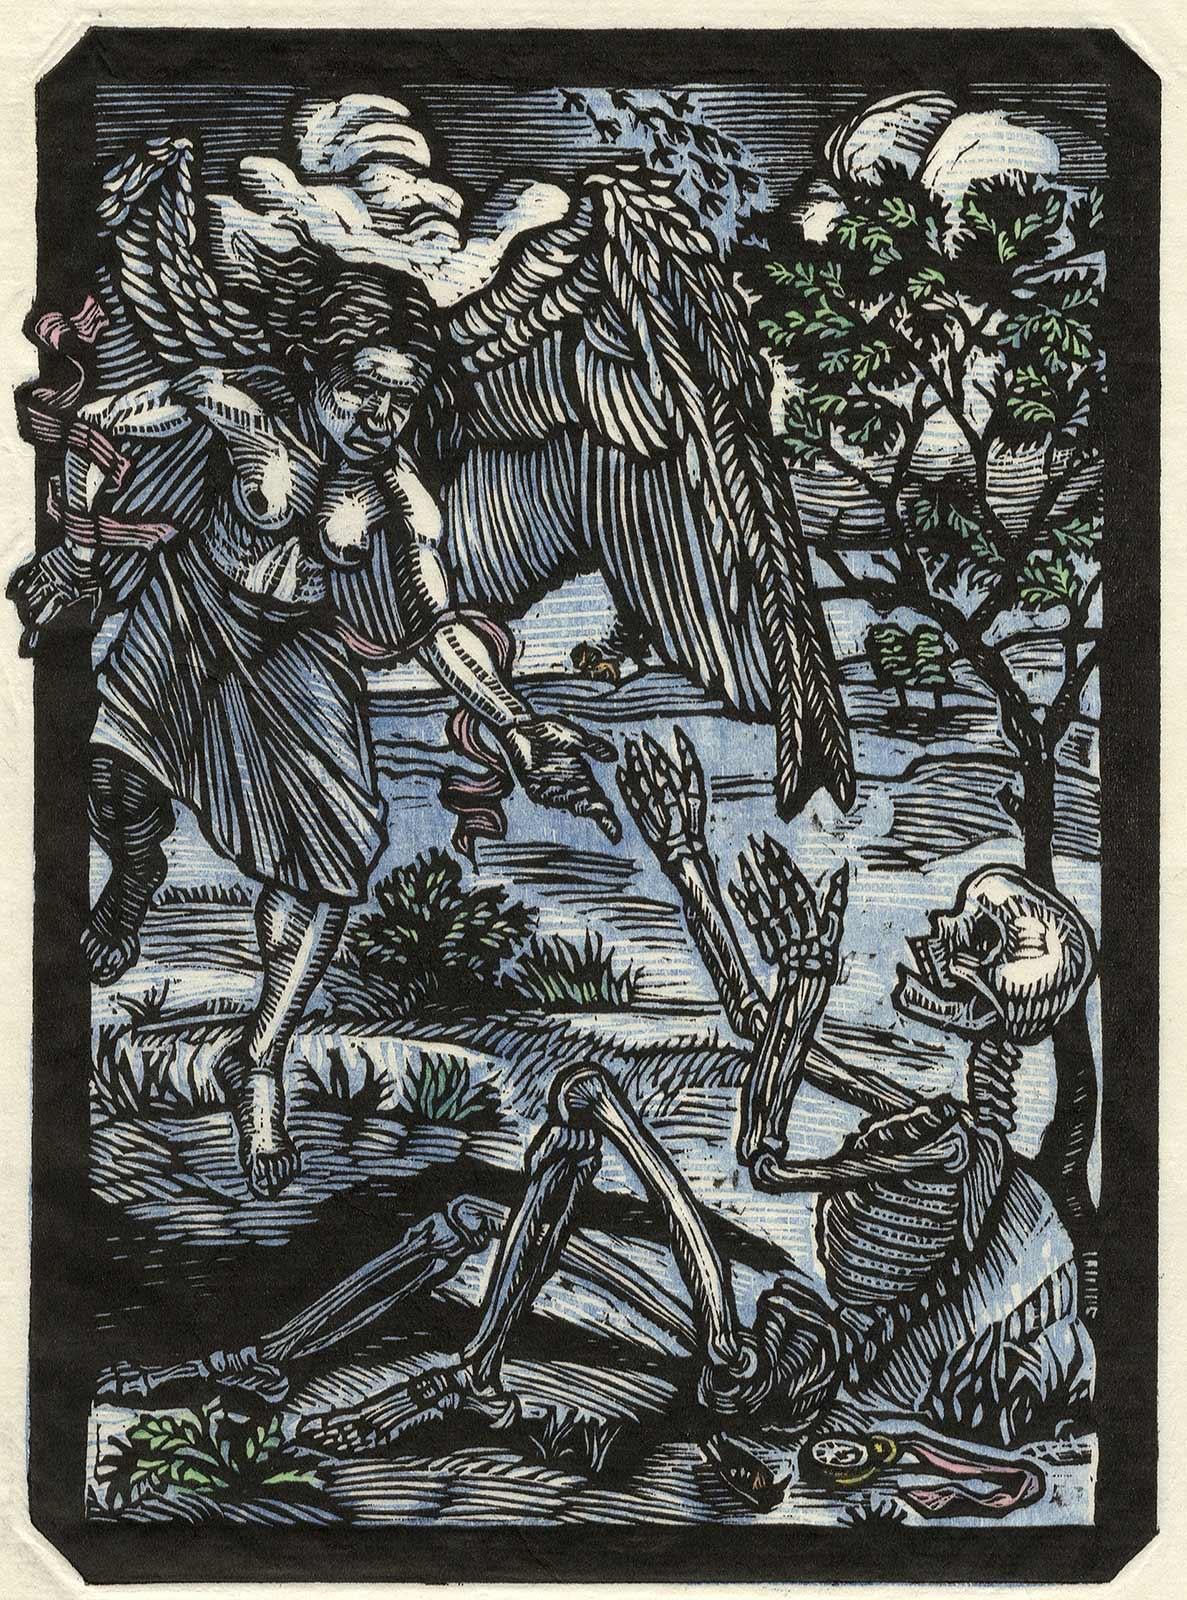 Donna Evans Figurative Print - Angel and Skeleton (the rescuing Angel appears to be female)